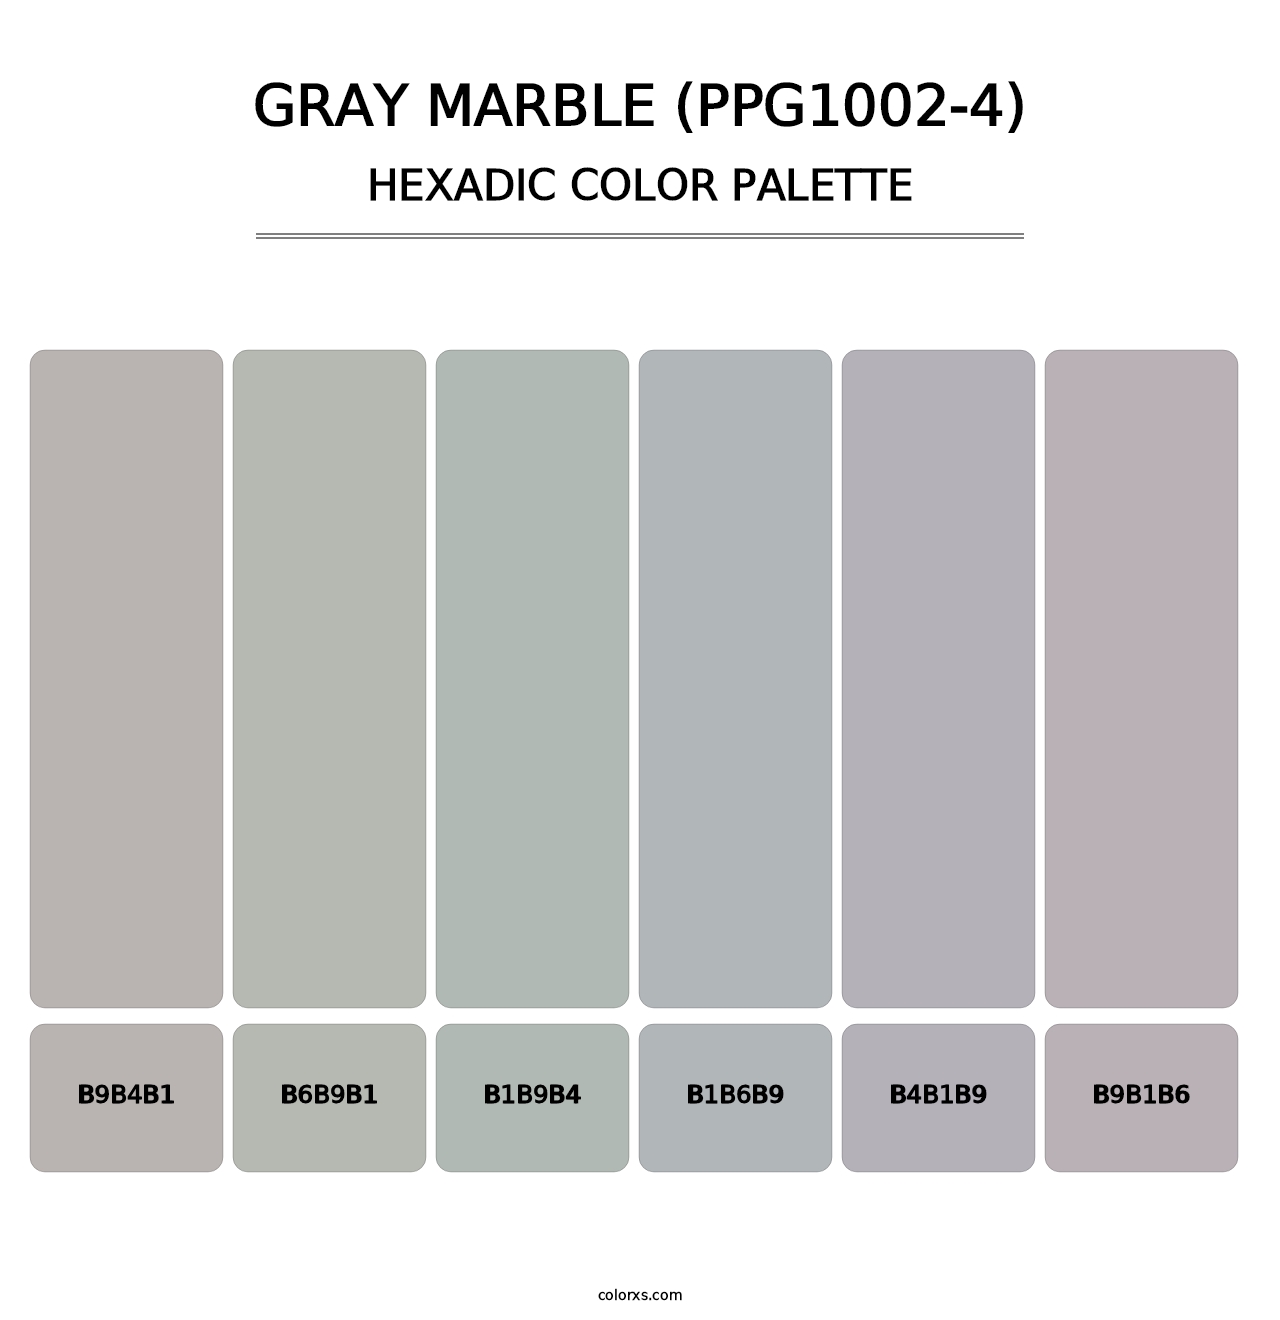 Gray Marble (PPG1002-4) - Hexadic Color Palette